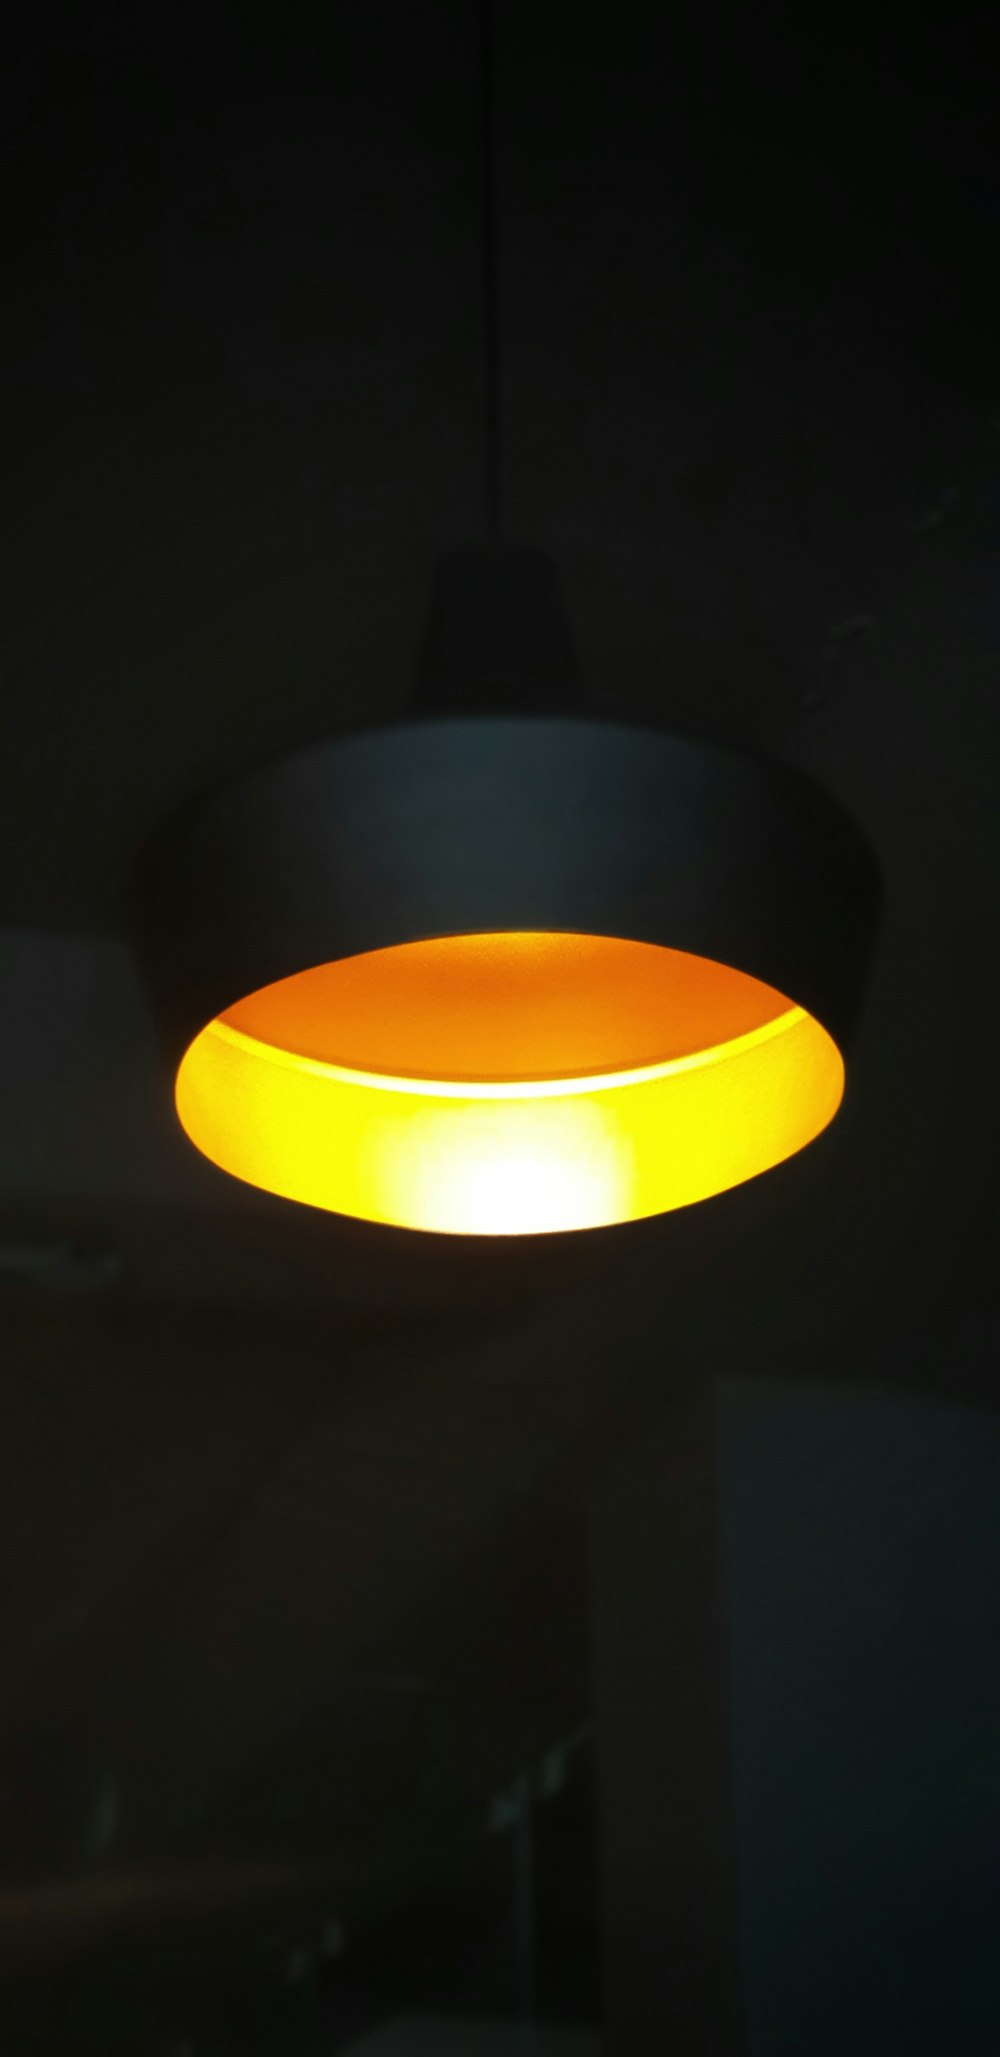 lighted round yellow ceiling lamp